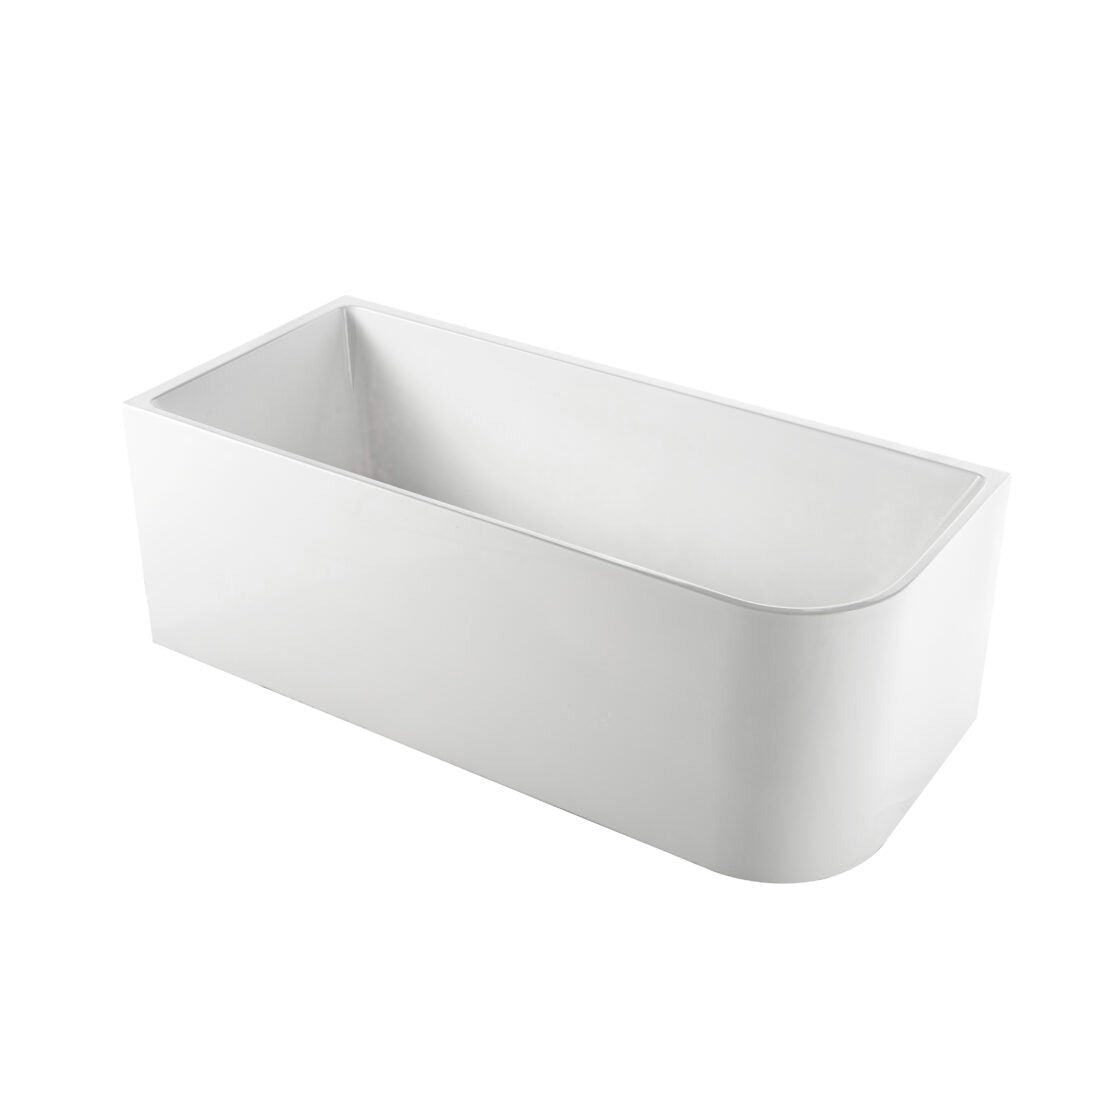 RIVA ELLIE LEFT CORNER BATHTUB GLOSS WHITE (AVAILABLE IN 1500MM AND 1700MM)